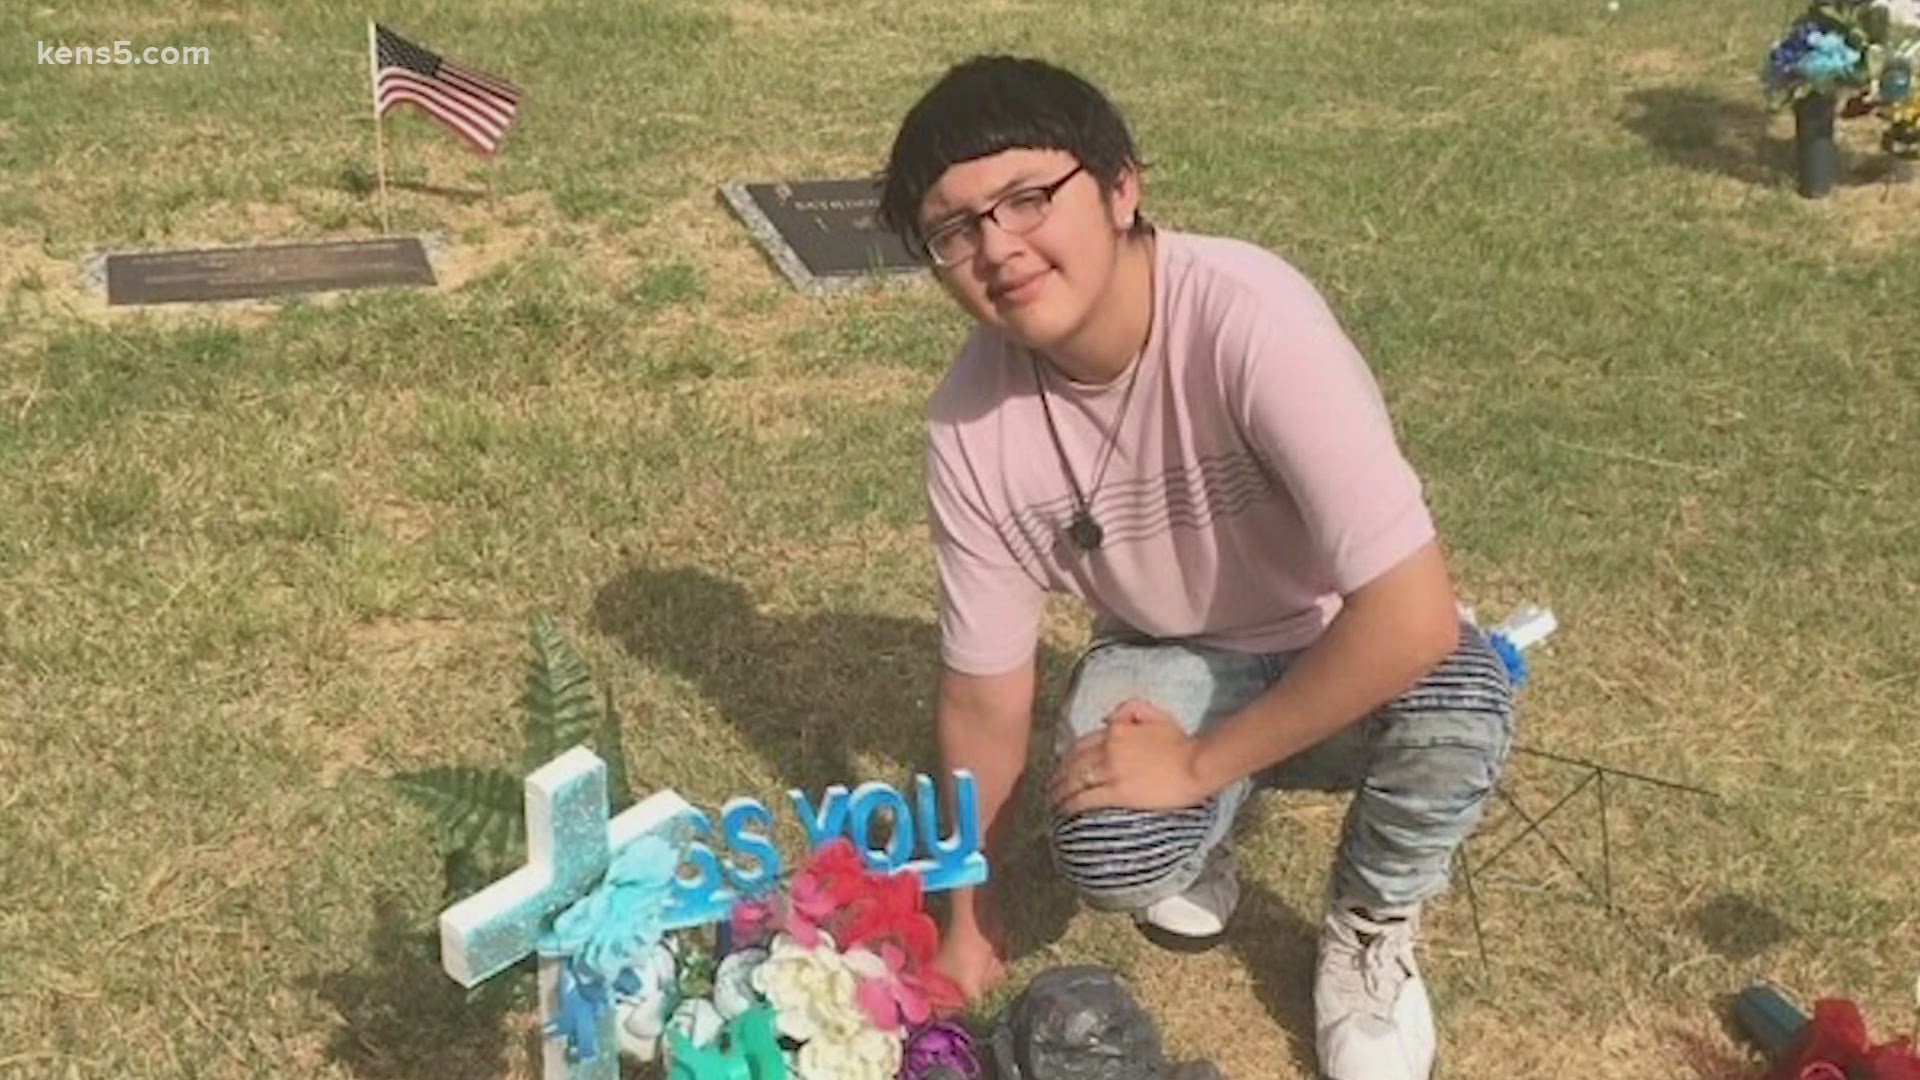 Jaden Rosas was in his family's apartment when a fight outside ended in gunfire. His heartbroken family is raising money for his funeral.